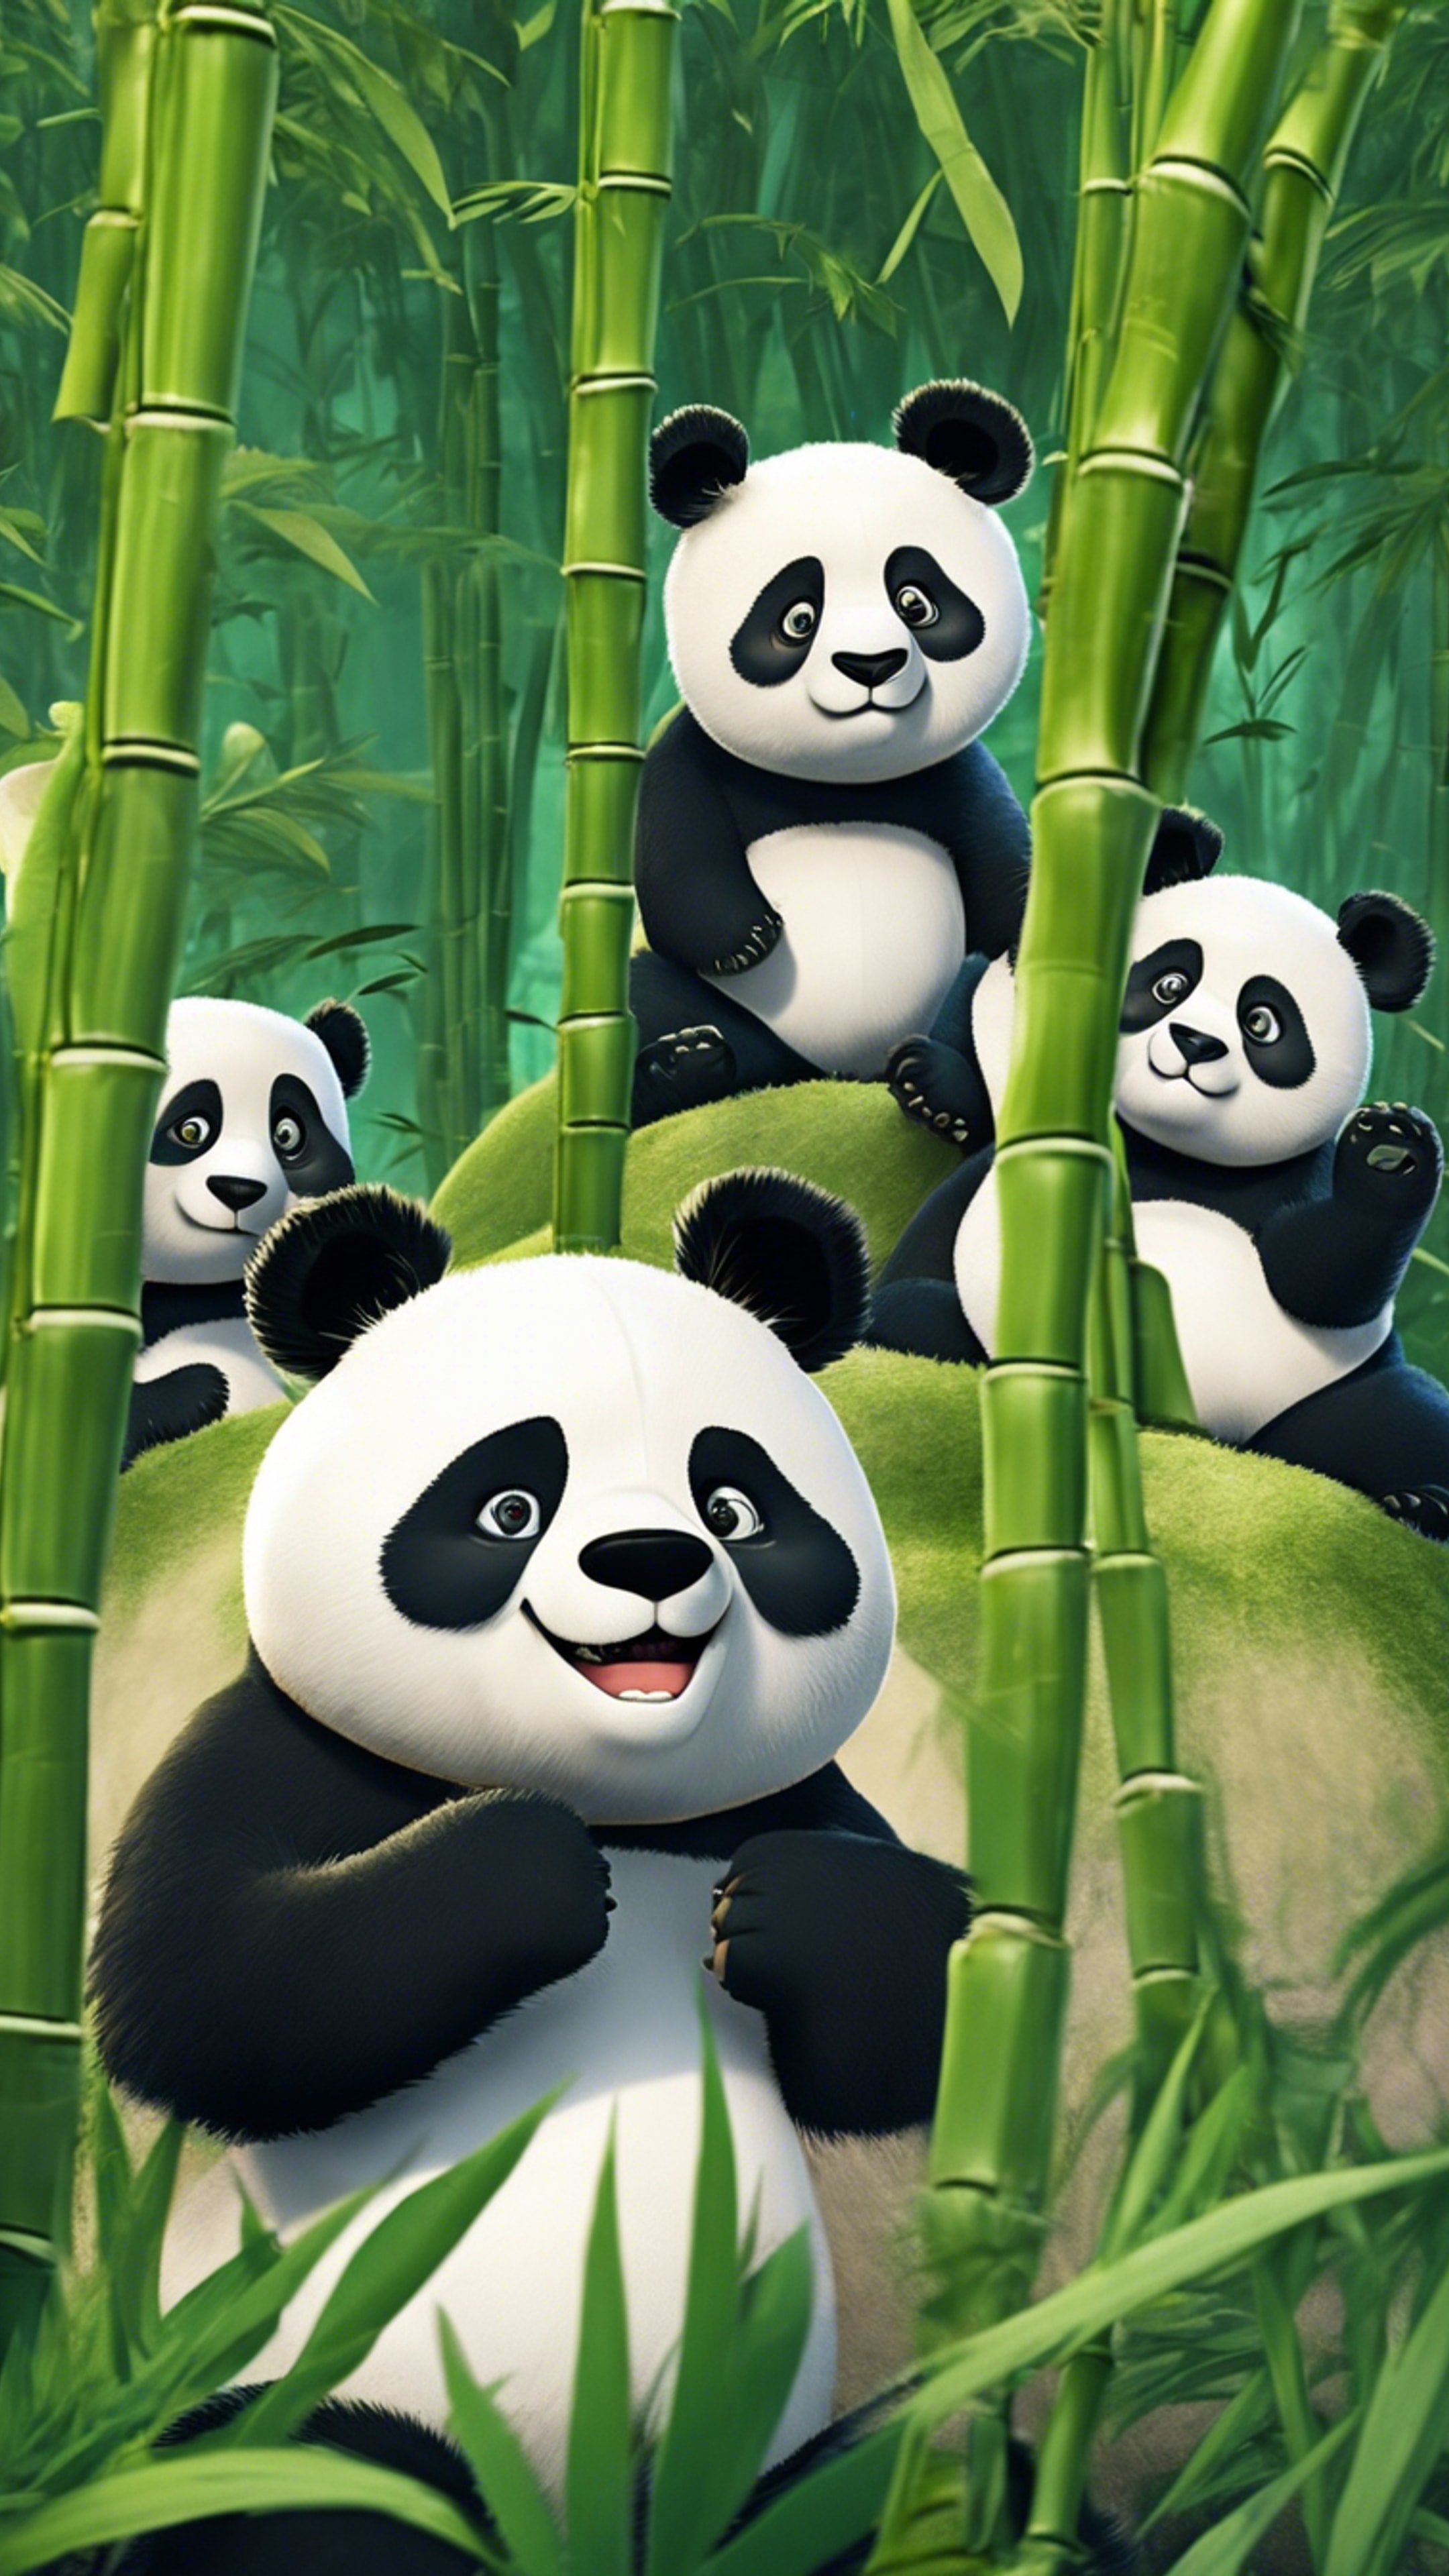 A group of fluffy cartoon pandas playing hide and seek in green bamboo forest. Papel de parede[63bcd8976f104e0d843a]